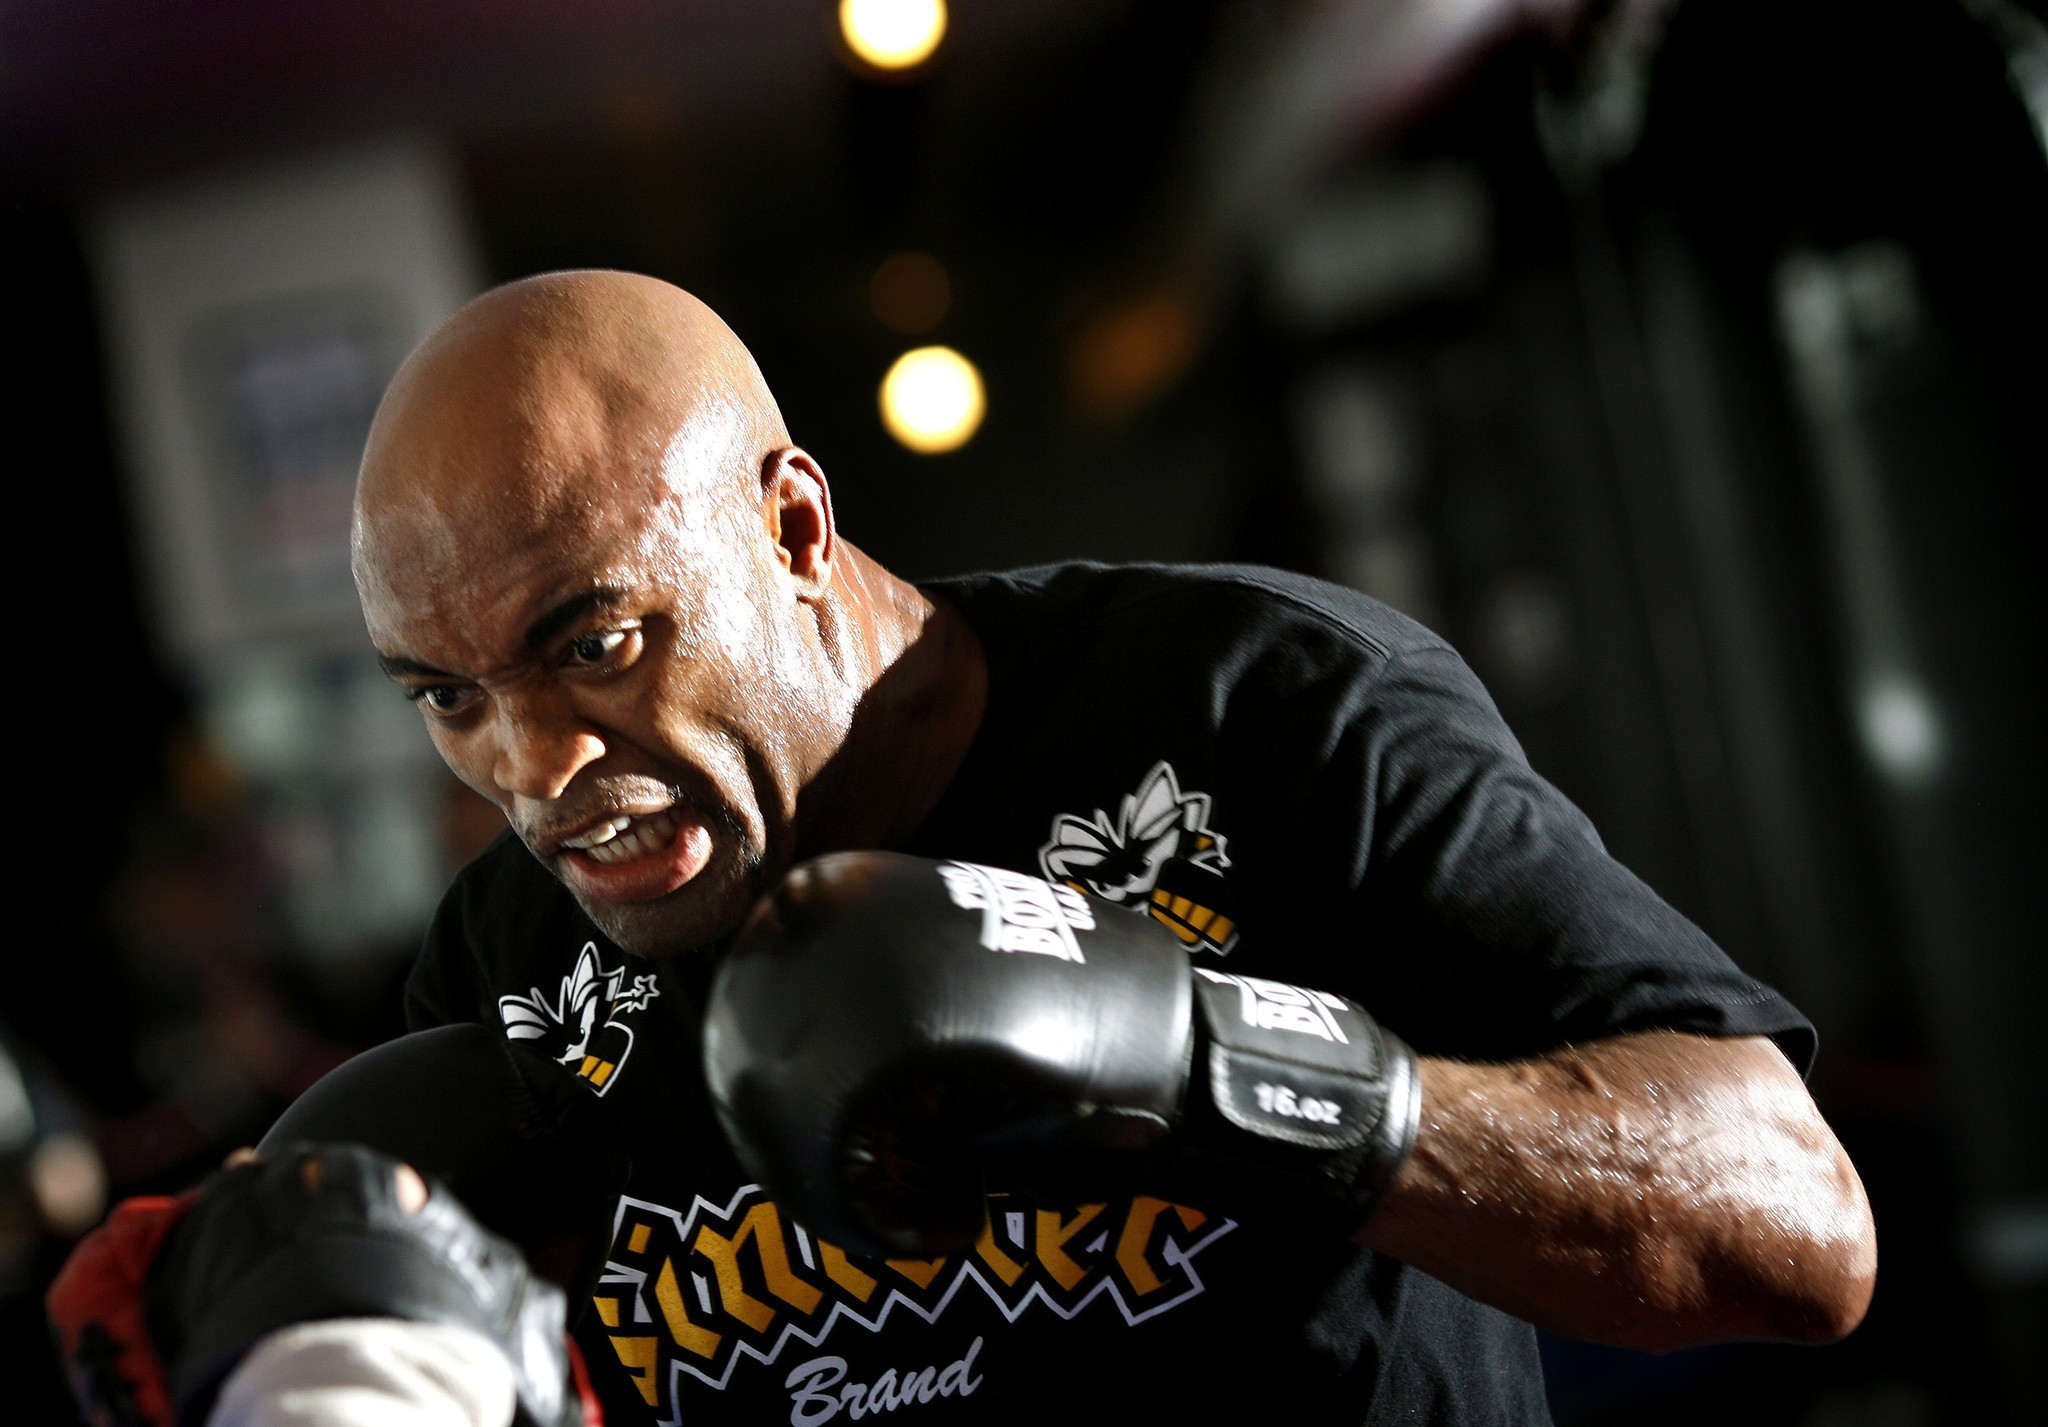 2048x1427 Stunning Hd Wallpapers Of Anderson Silva